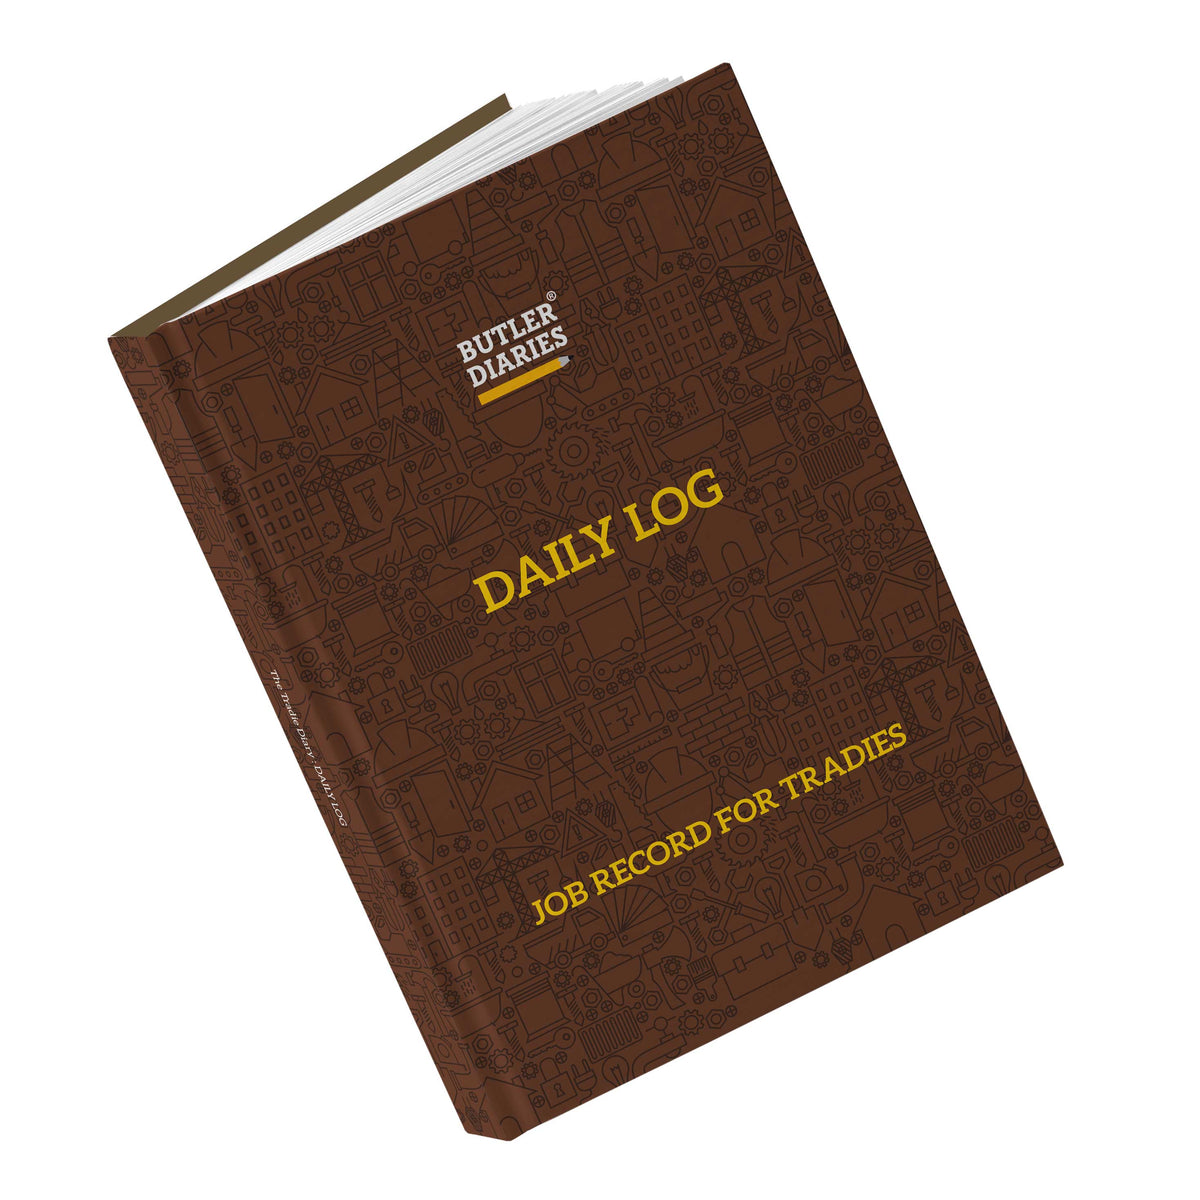 The Tradie Diary: DAILY LOG